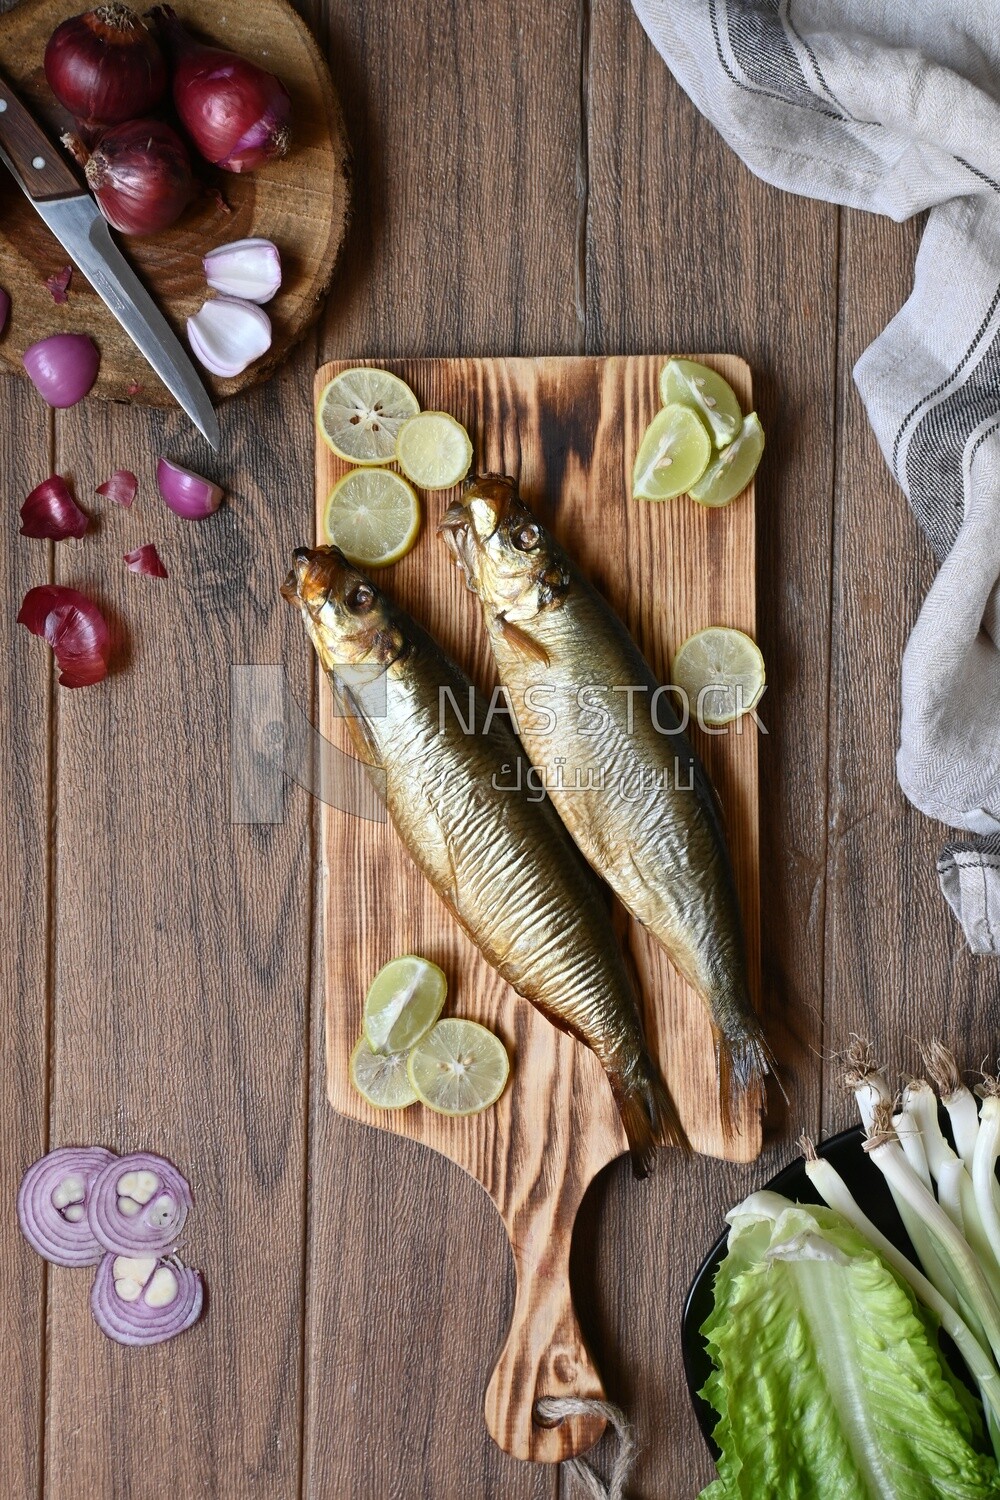 Smoked herring on a Cutting and Serving Board, lemon and onion, traditional food, smoked fish